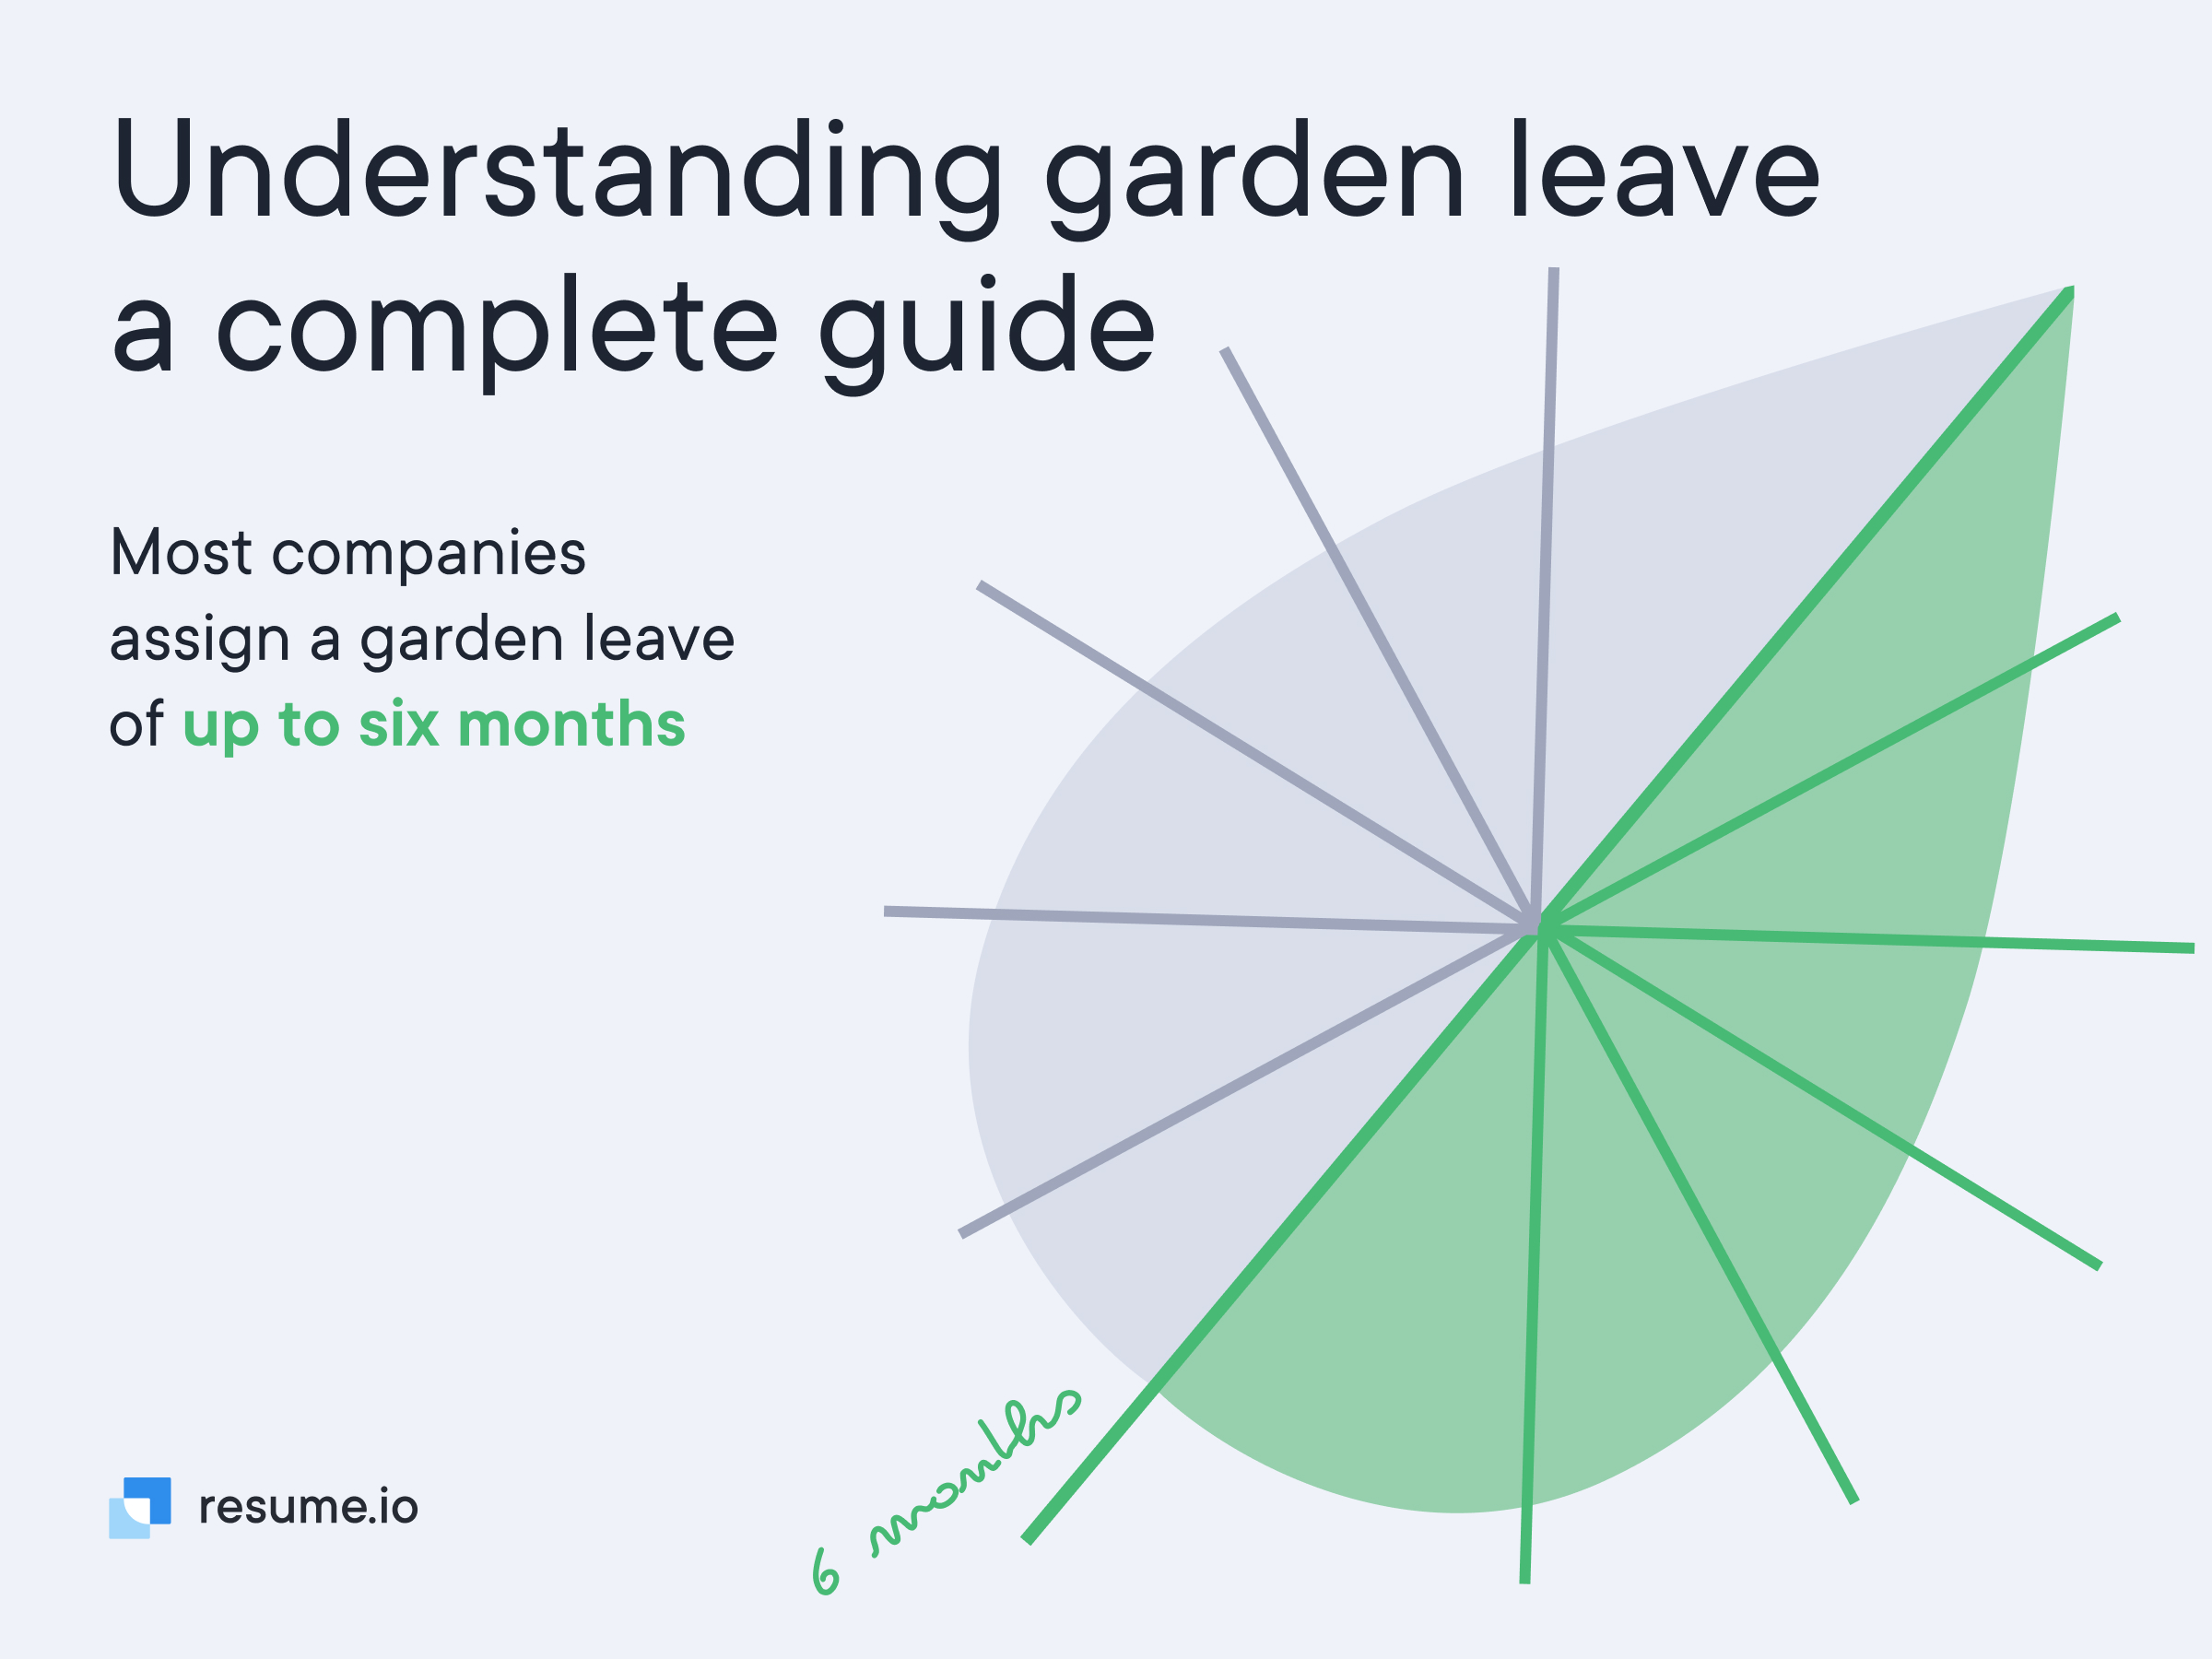 Most companies assign a garden leave for up to six months